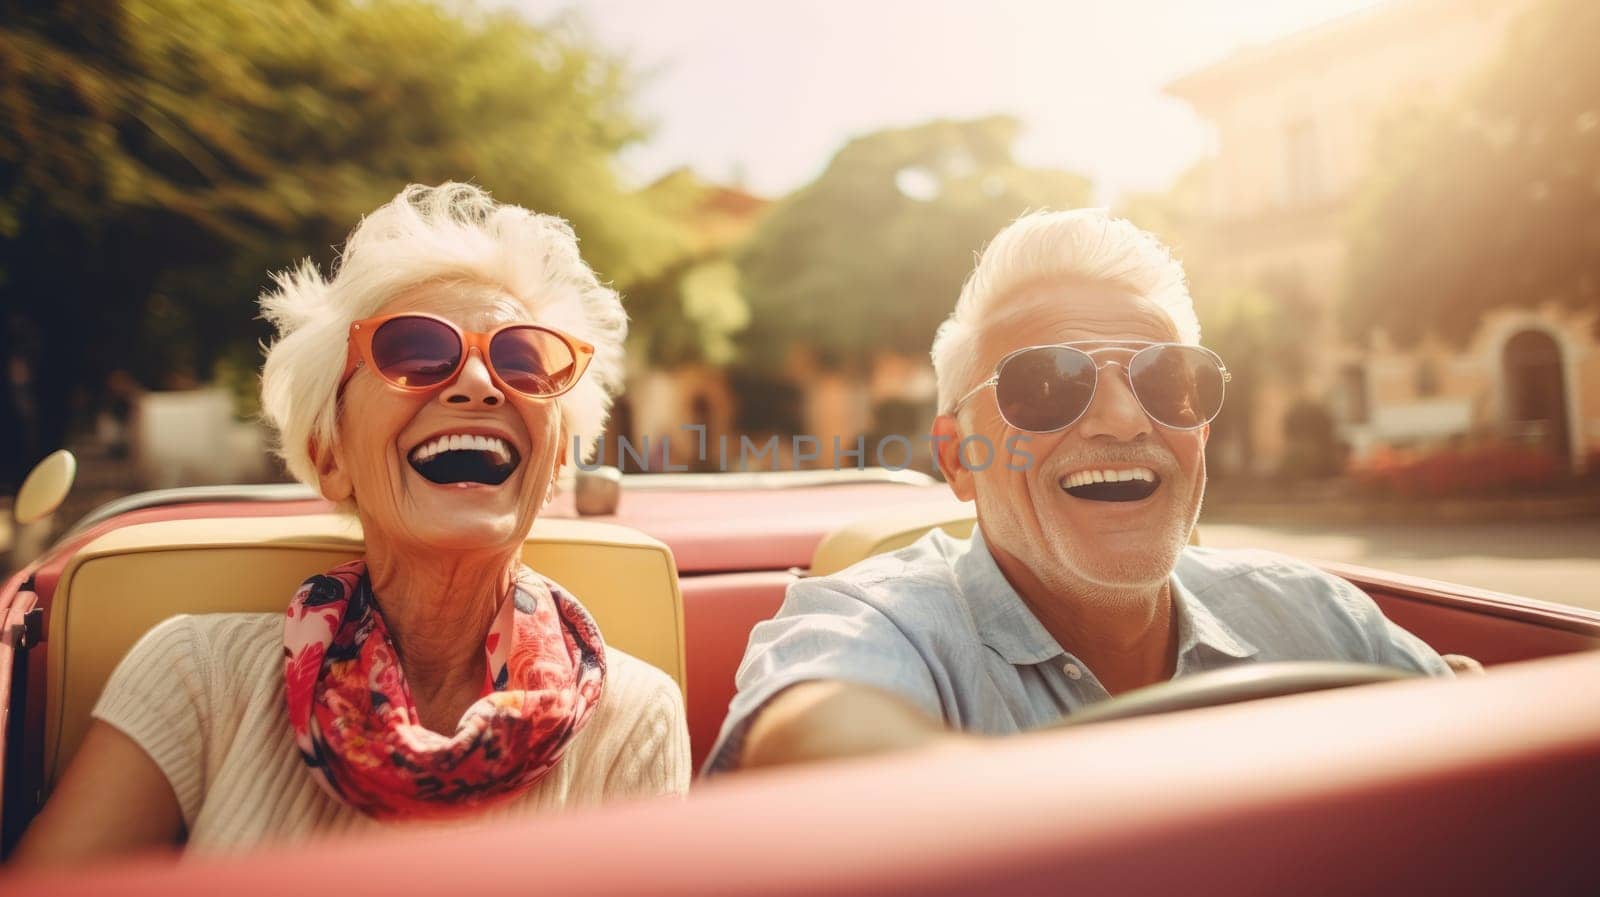 A smiling couple in a red convertible, enjoying a sunny day drive. The woman wears a red scarf, the man a blue shirt. No other cars on the road, surrounded by lush green trees.